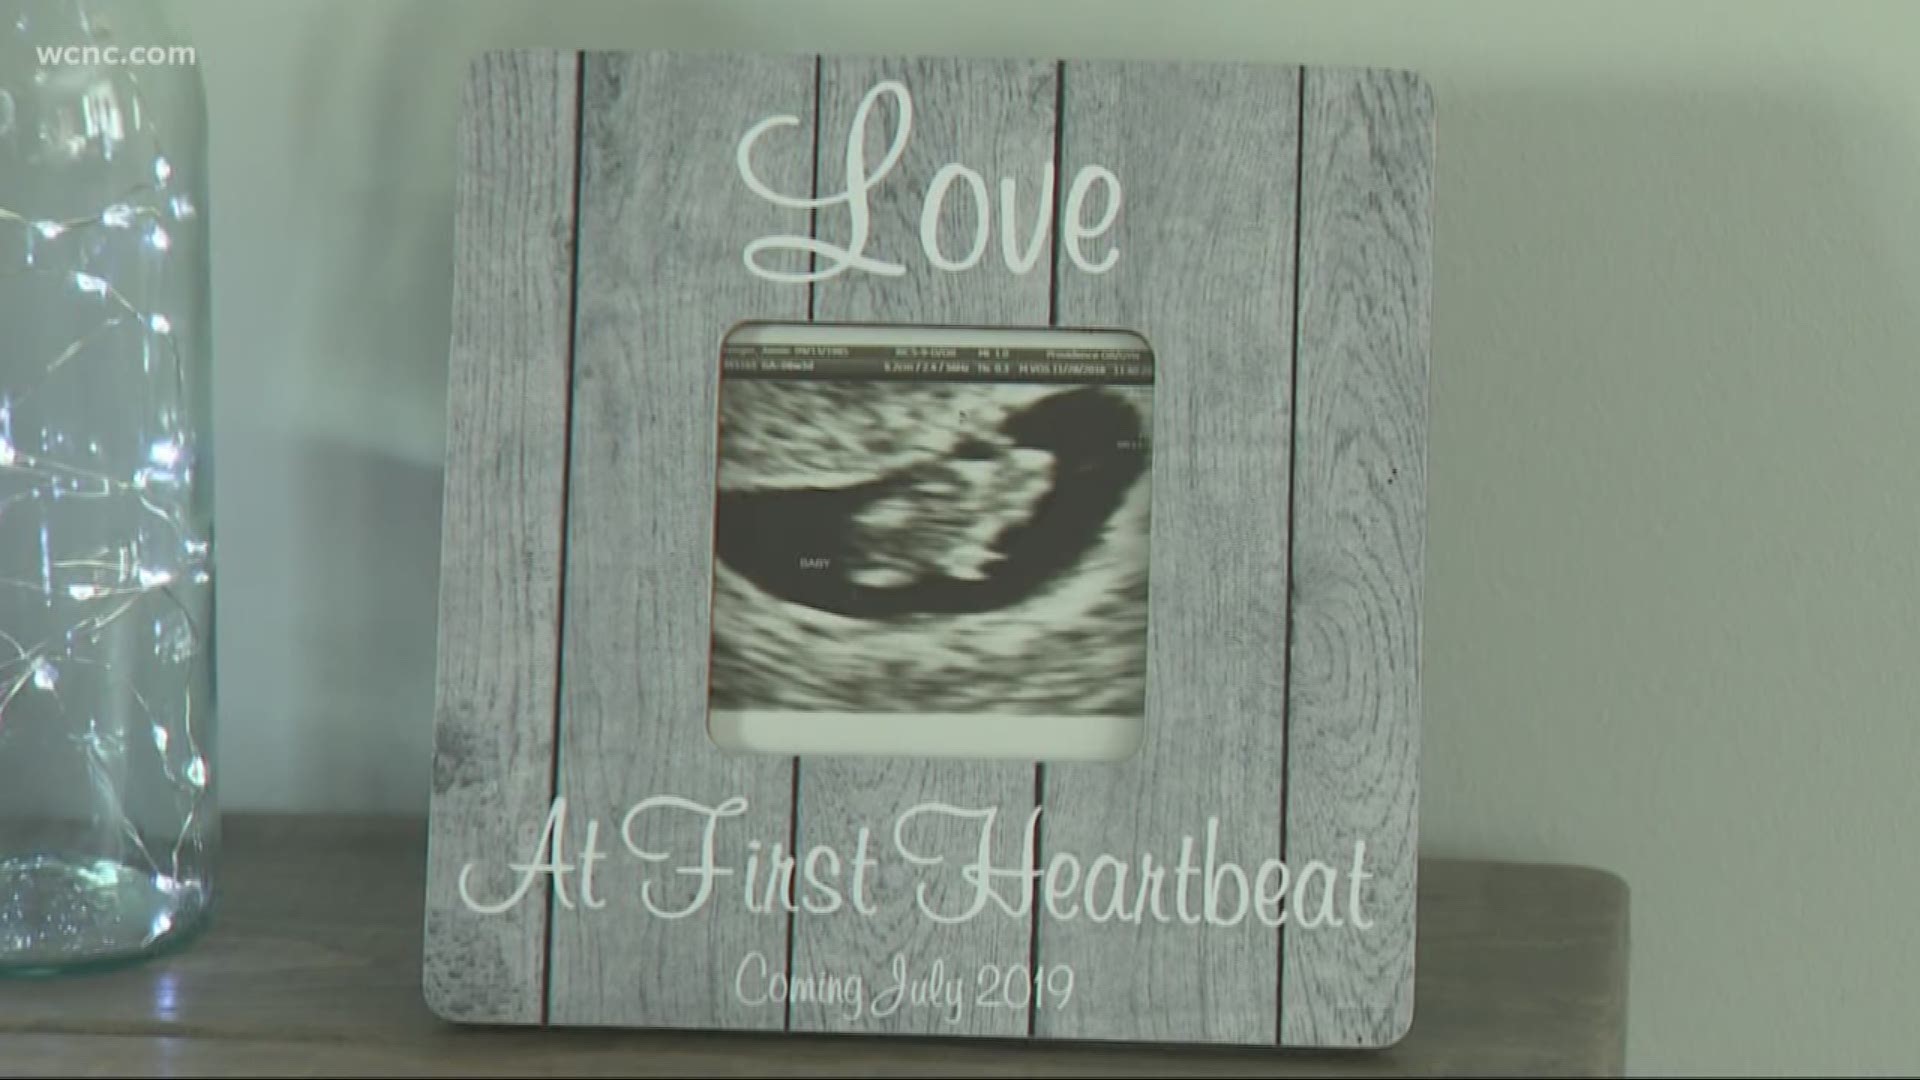 Christmas is extra special this year for one Charlotte area newlywed couple expecting their first child. The way the dad-to-be found out is as sweet as it gets.